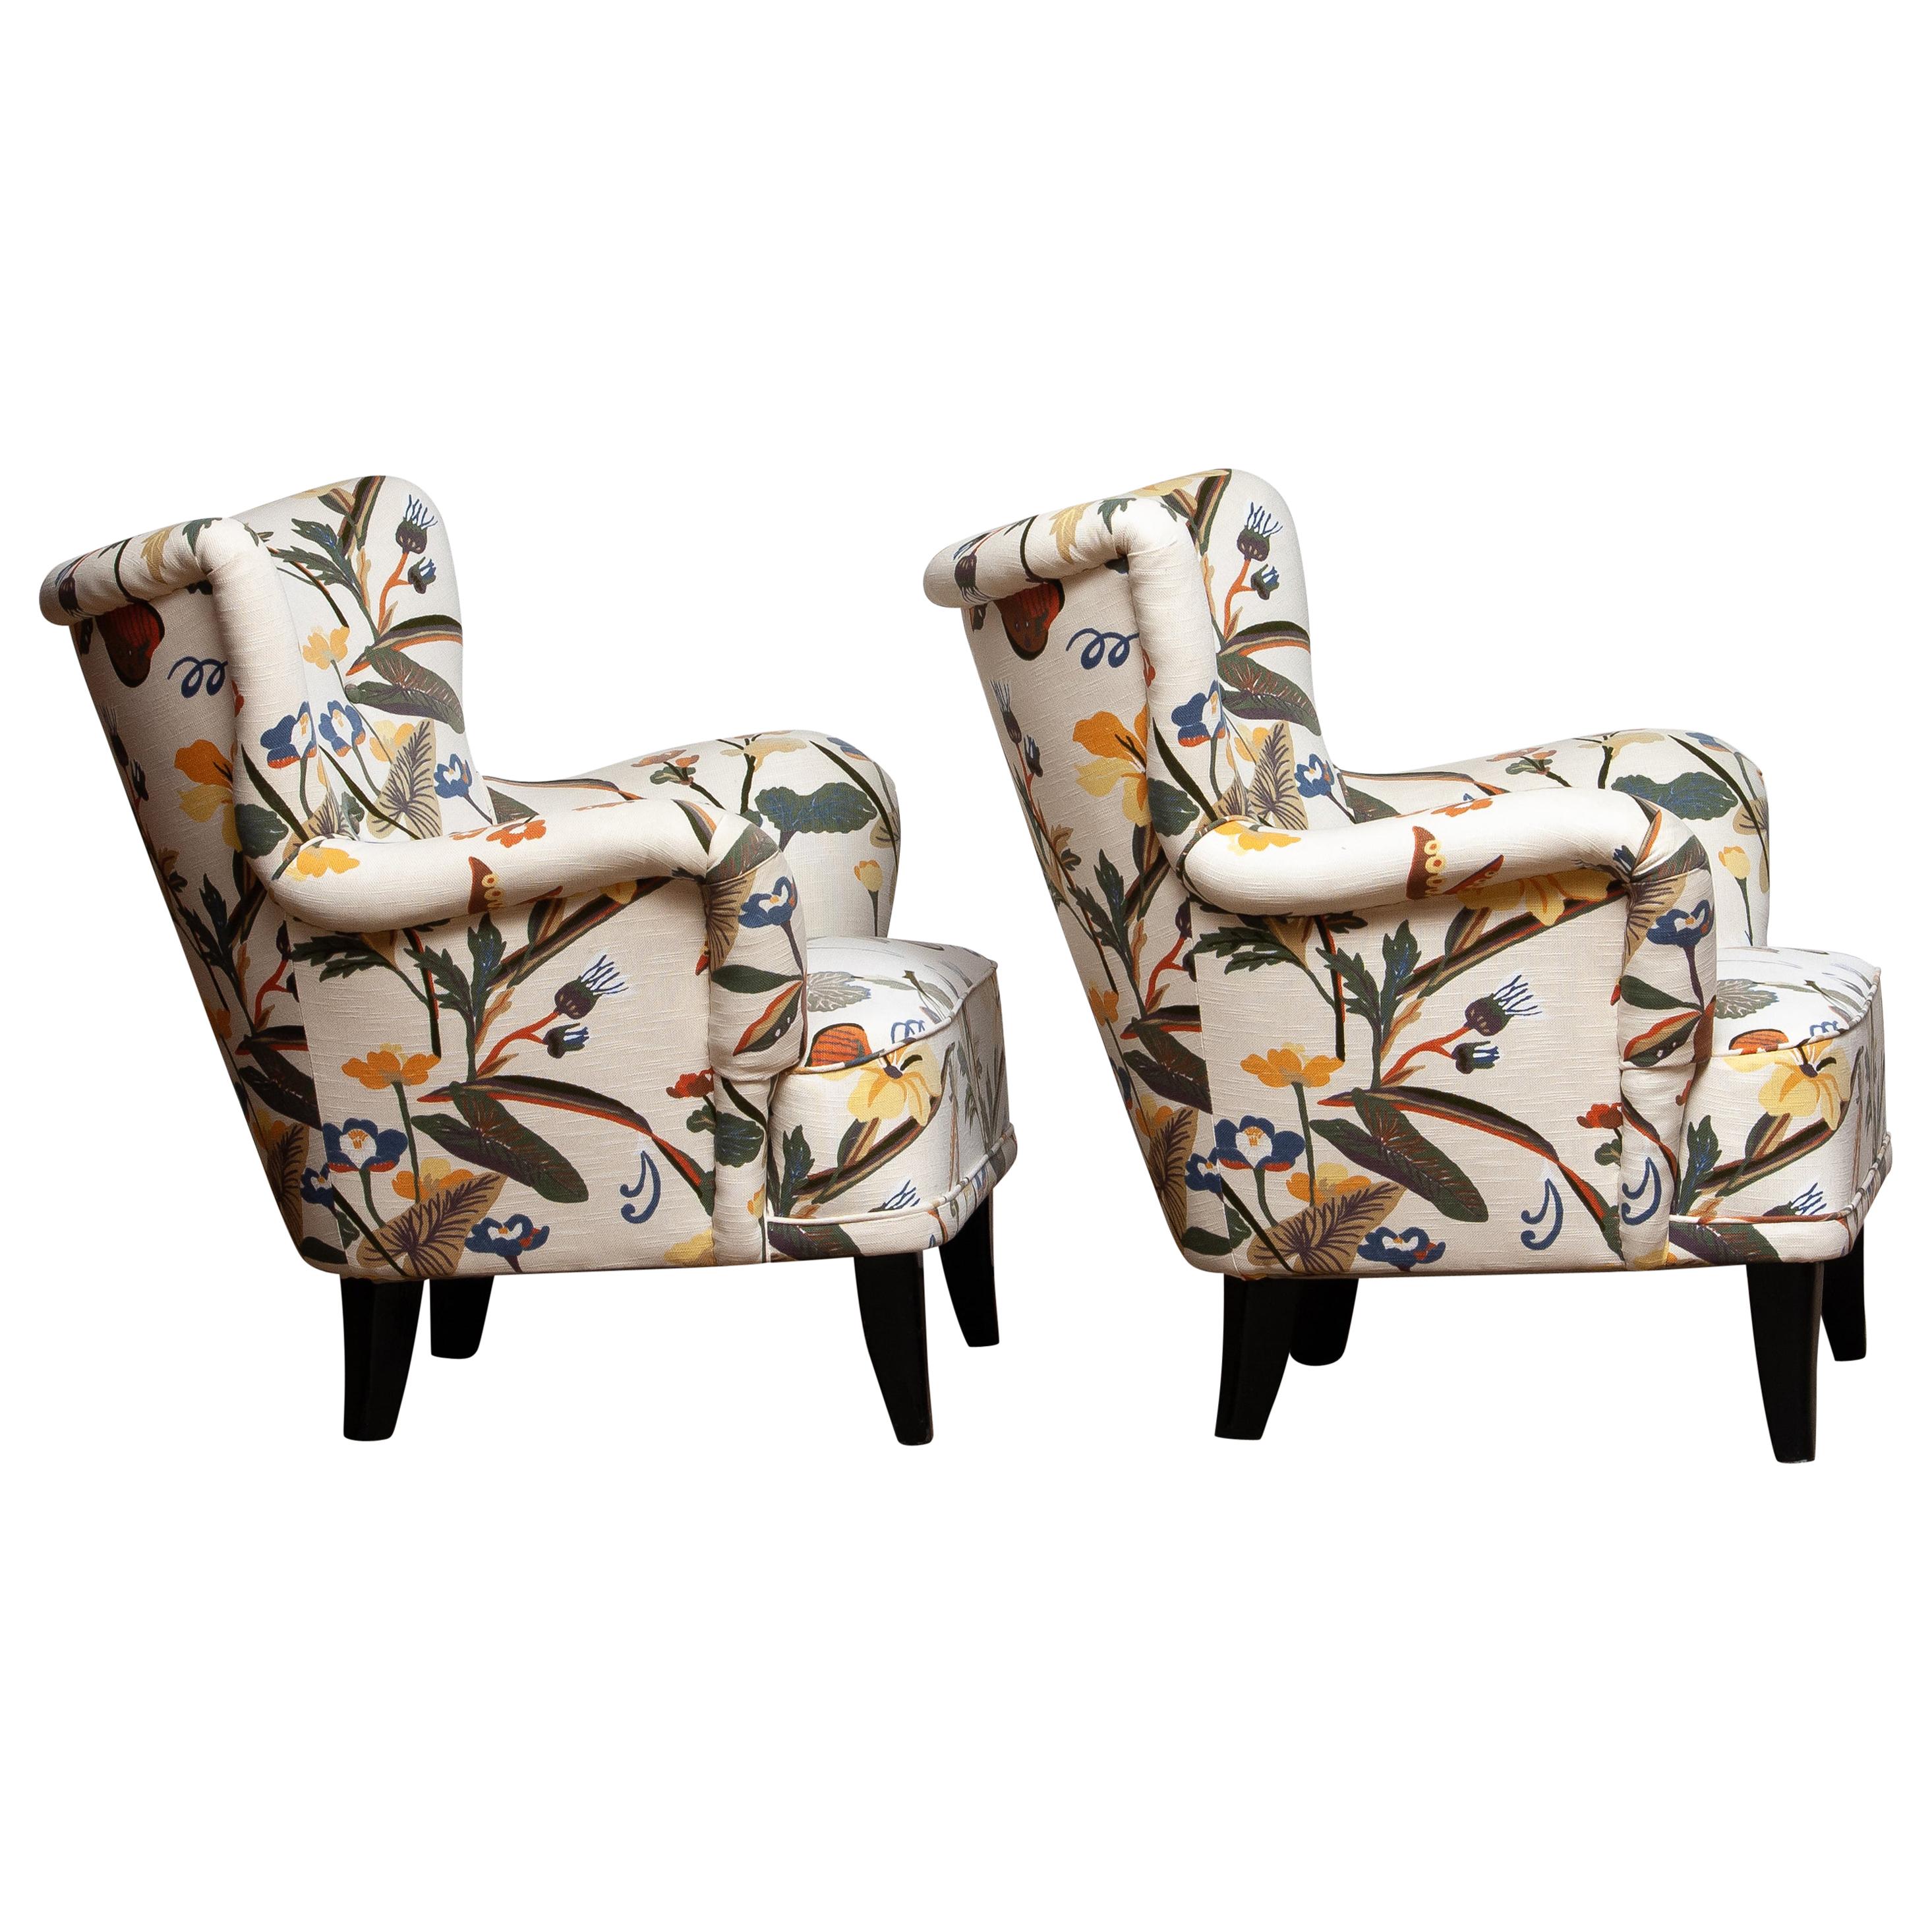 Pair Lounge / Easy Chairs by Ilmari Lappalainen For Asko with Josef Frank Fabric